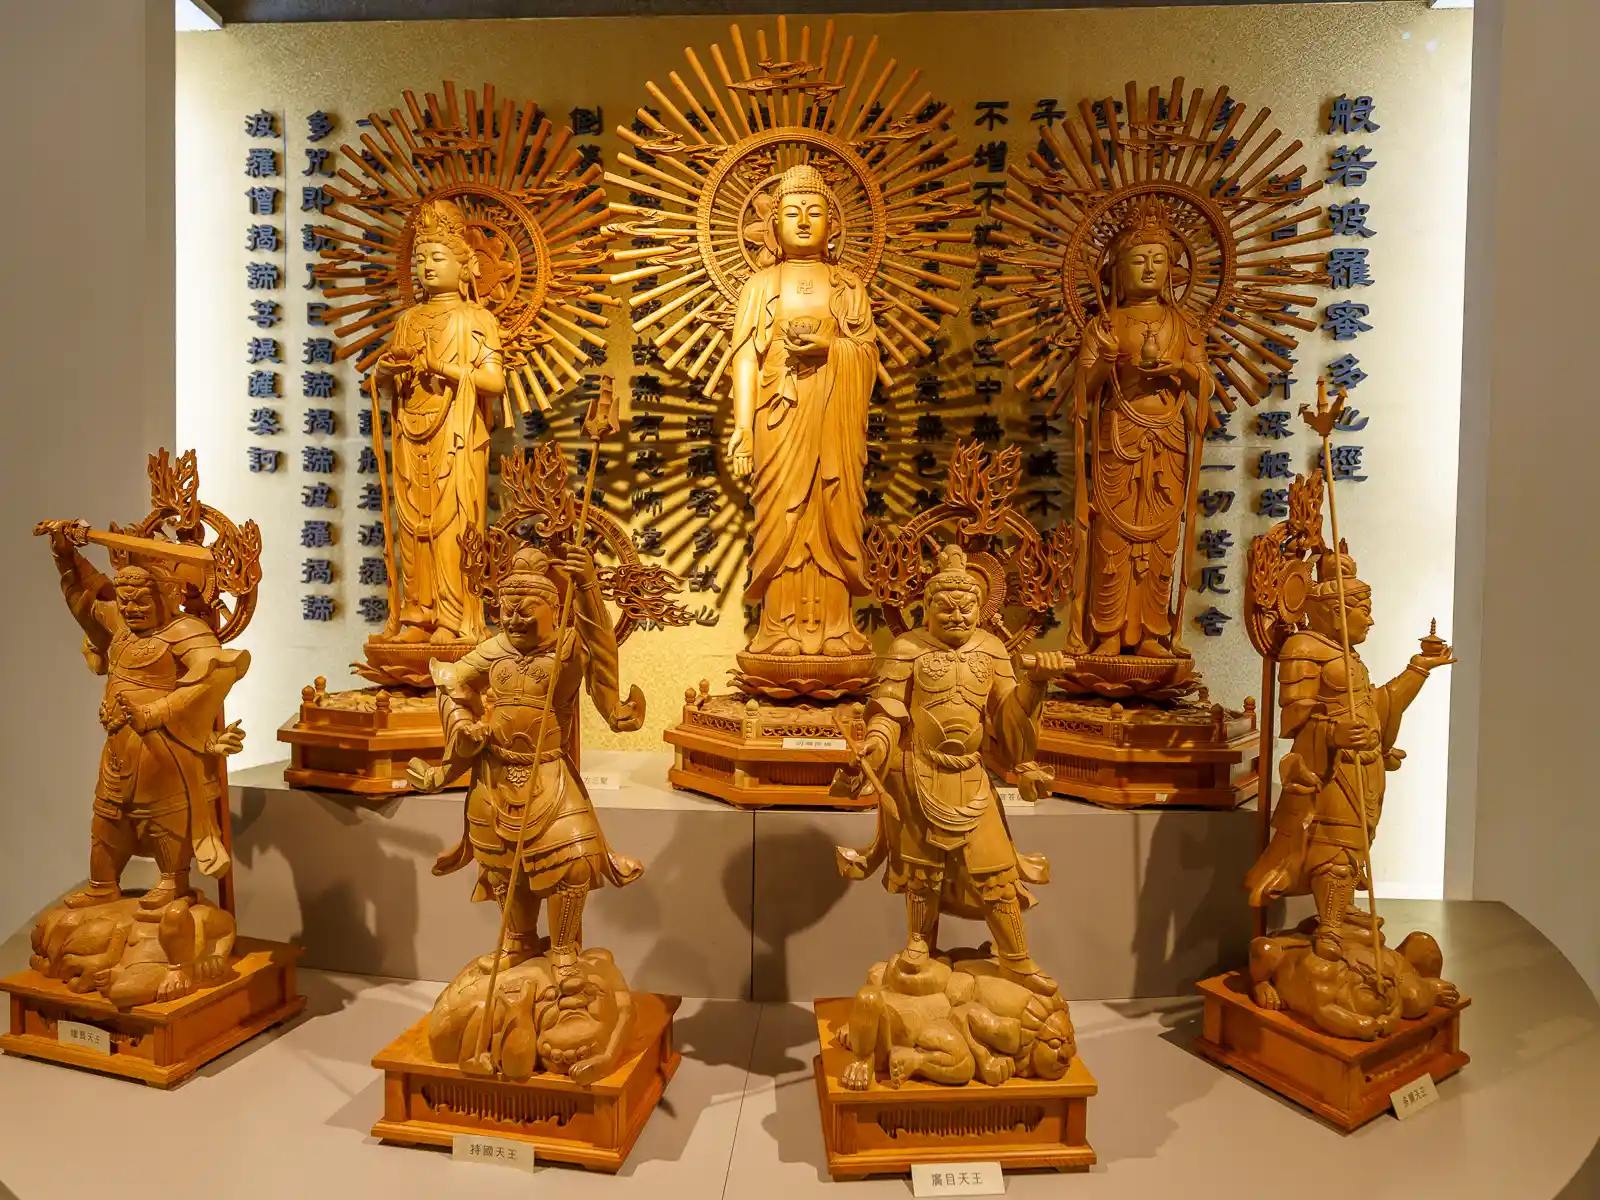 Seven woodcarvings of mythological figures and gods.